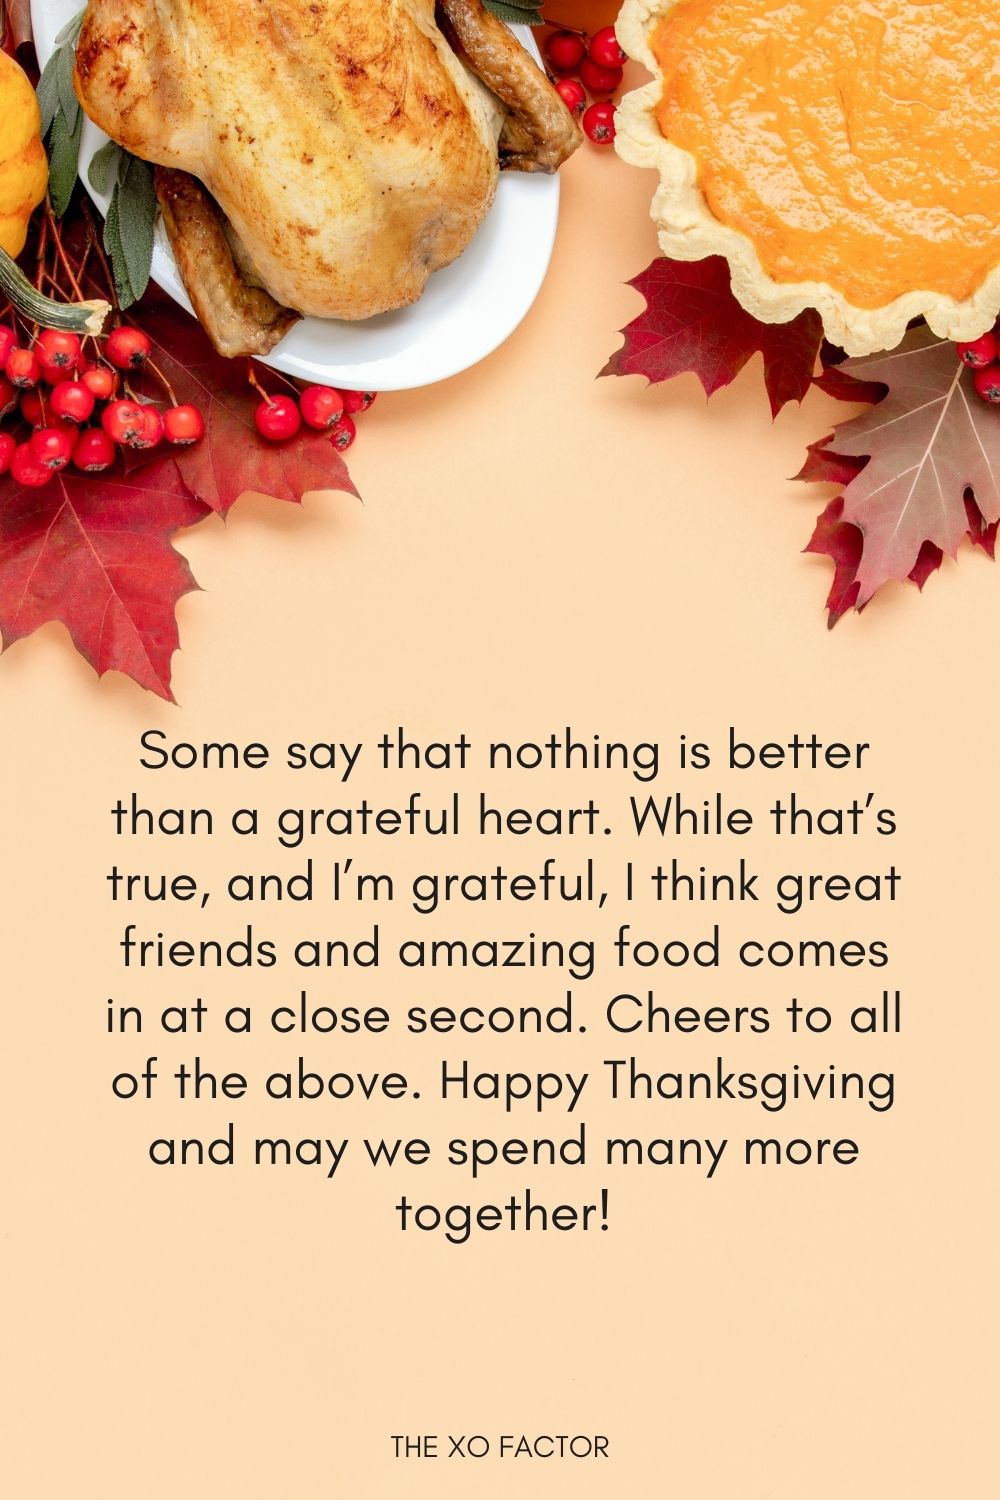 Some say that nothing is better than a grateful heart. While that’s true, and I’m grateful, I think great friends and amazing food comes in at a close second. Cheers to all of the above. Happy Thanksgiving and may we spend many more together!